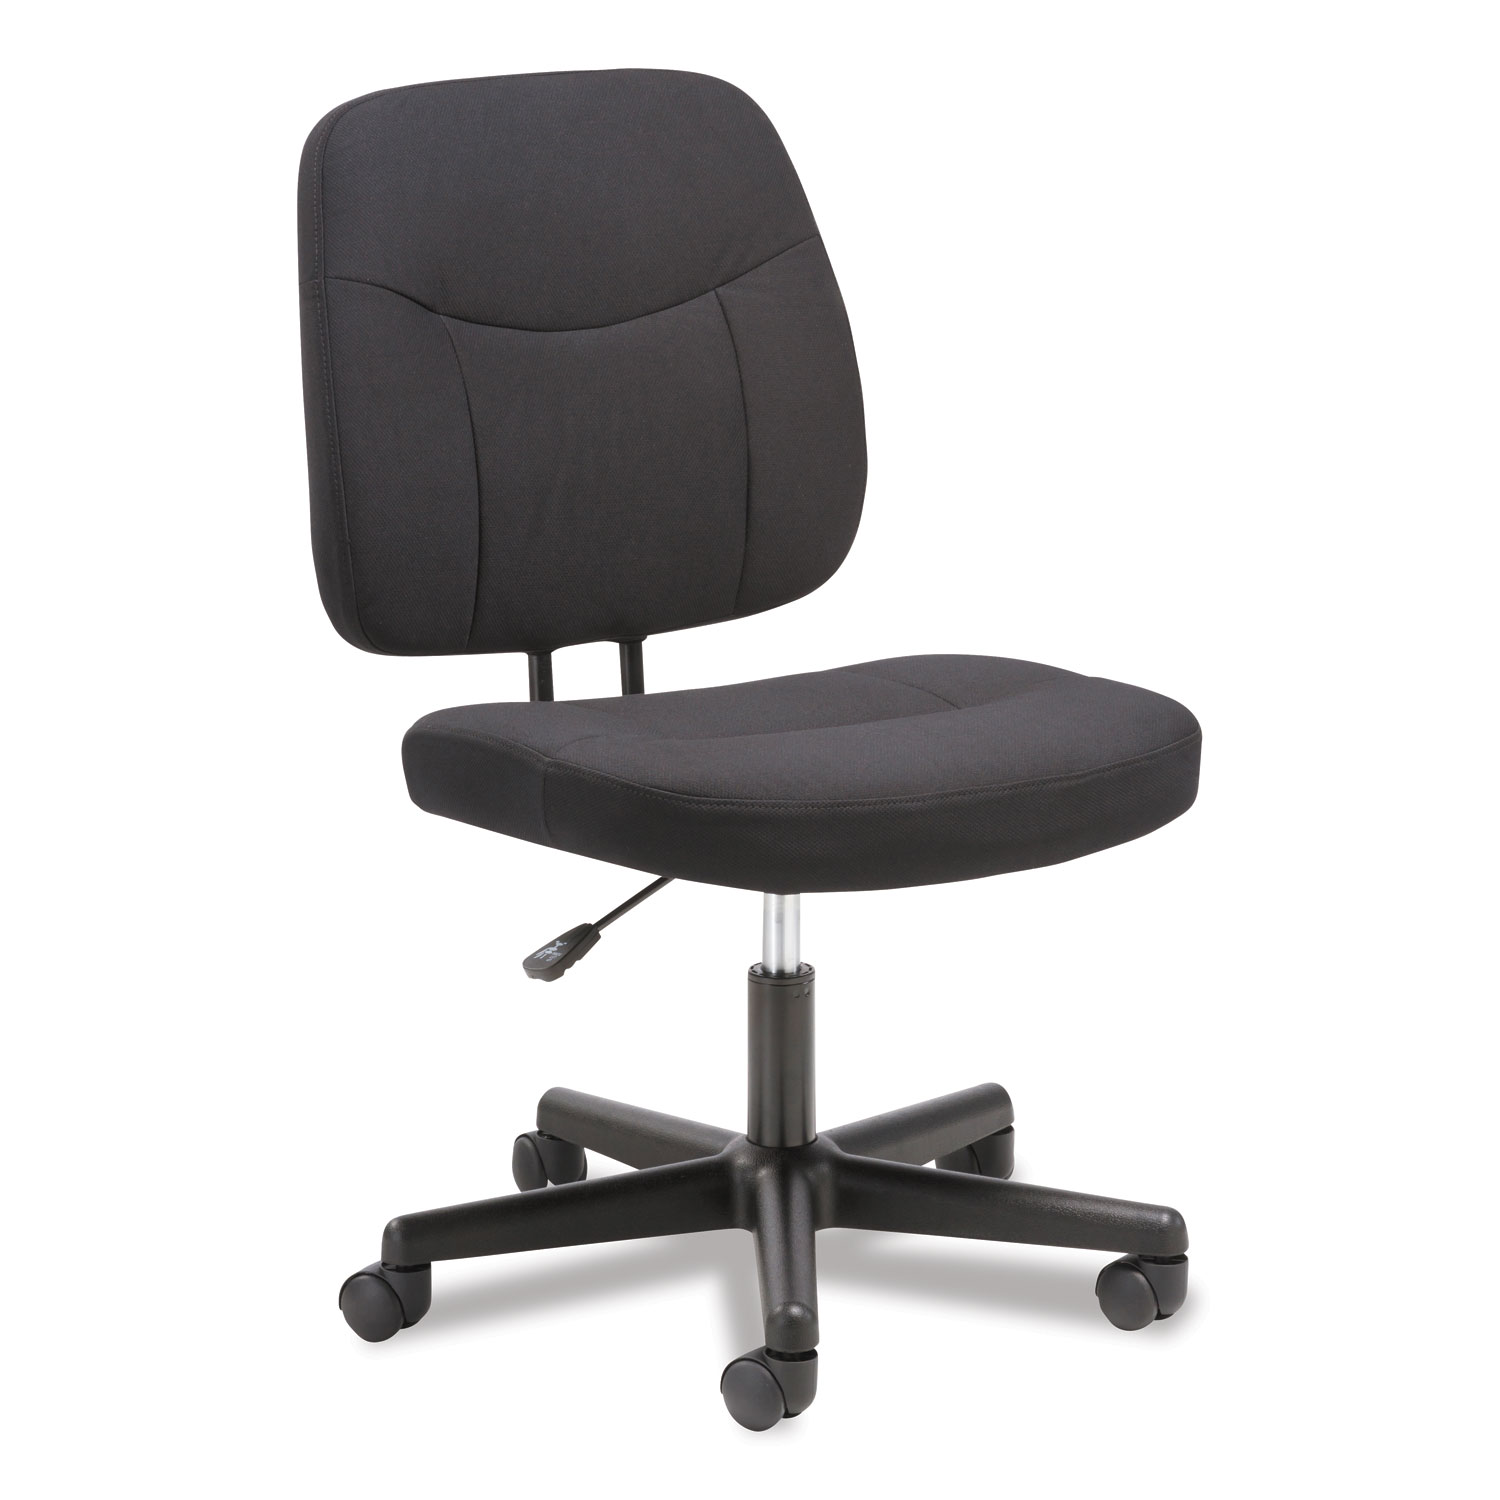  Sadie BSXVST401 4-Oh-One, Supports up to 250 lbs., Black Seat/Black Back, Black Base (BSXVST401) 